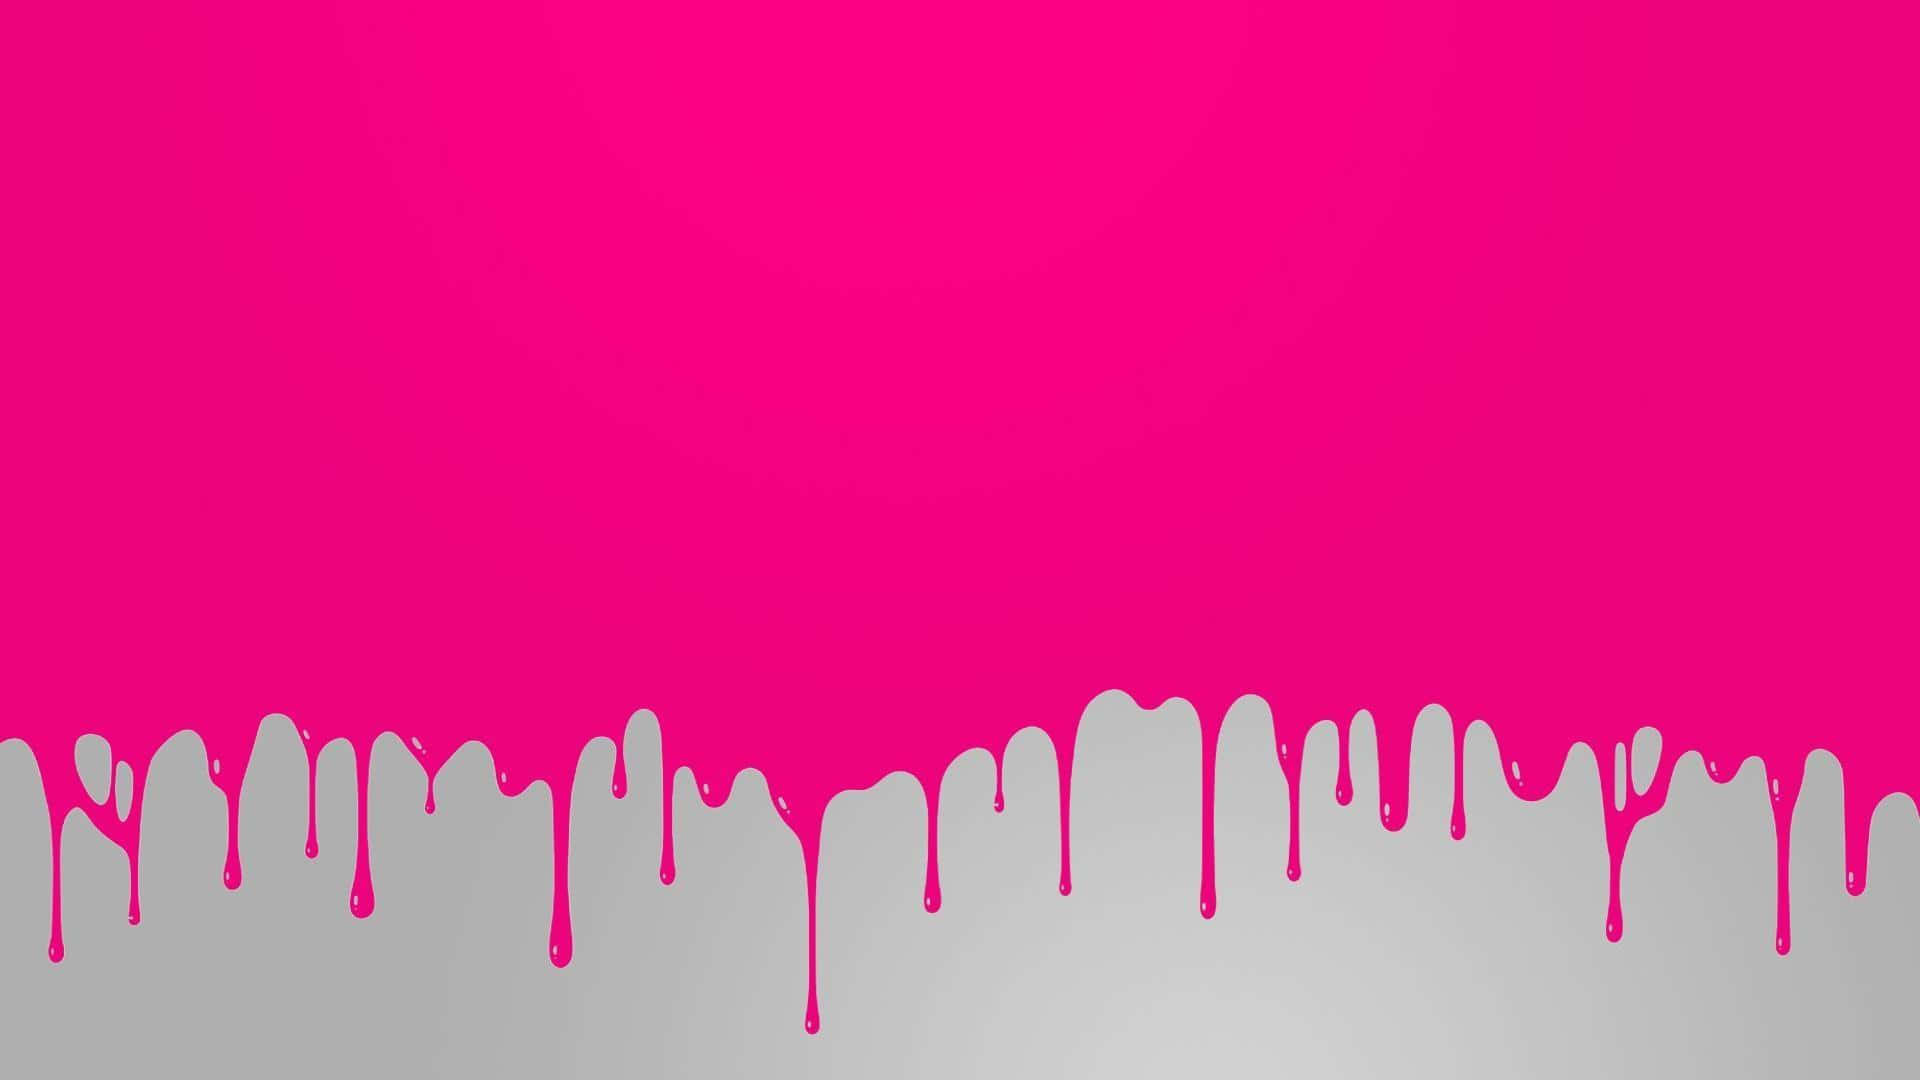 100+] Paint Drip Wallpapers